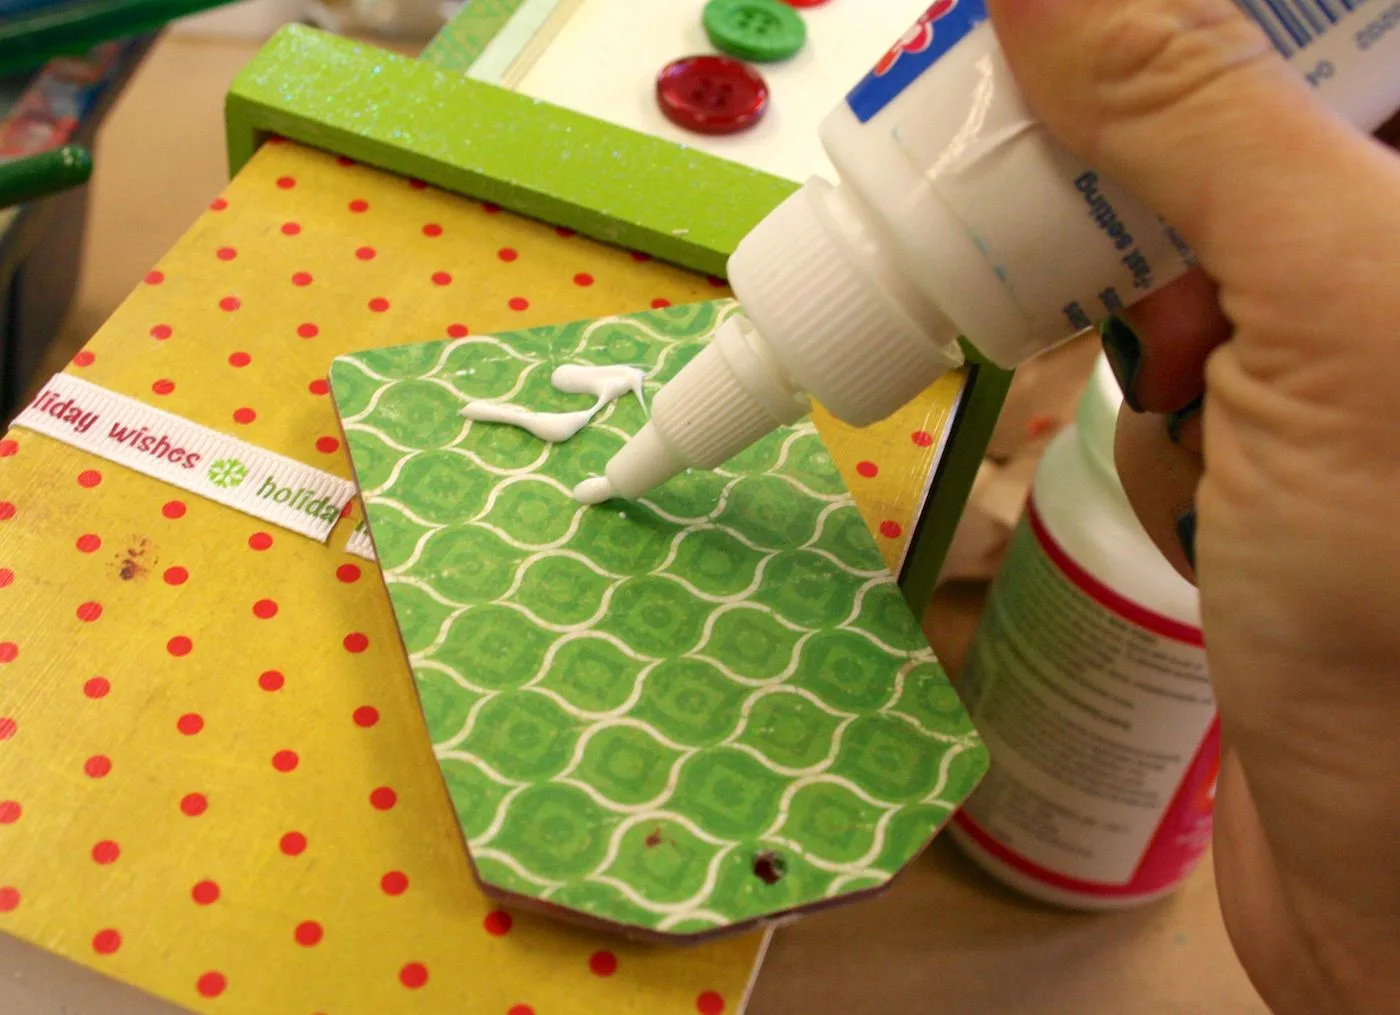 Gluing the gift tag down to the wood box with craft glue